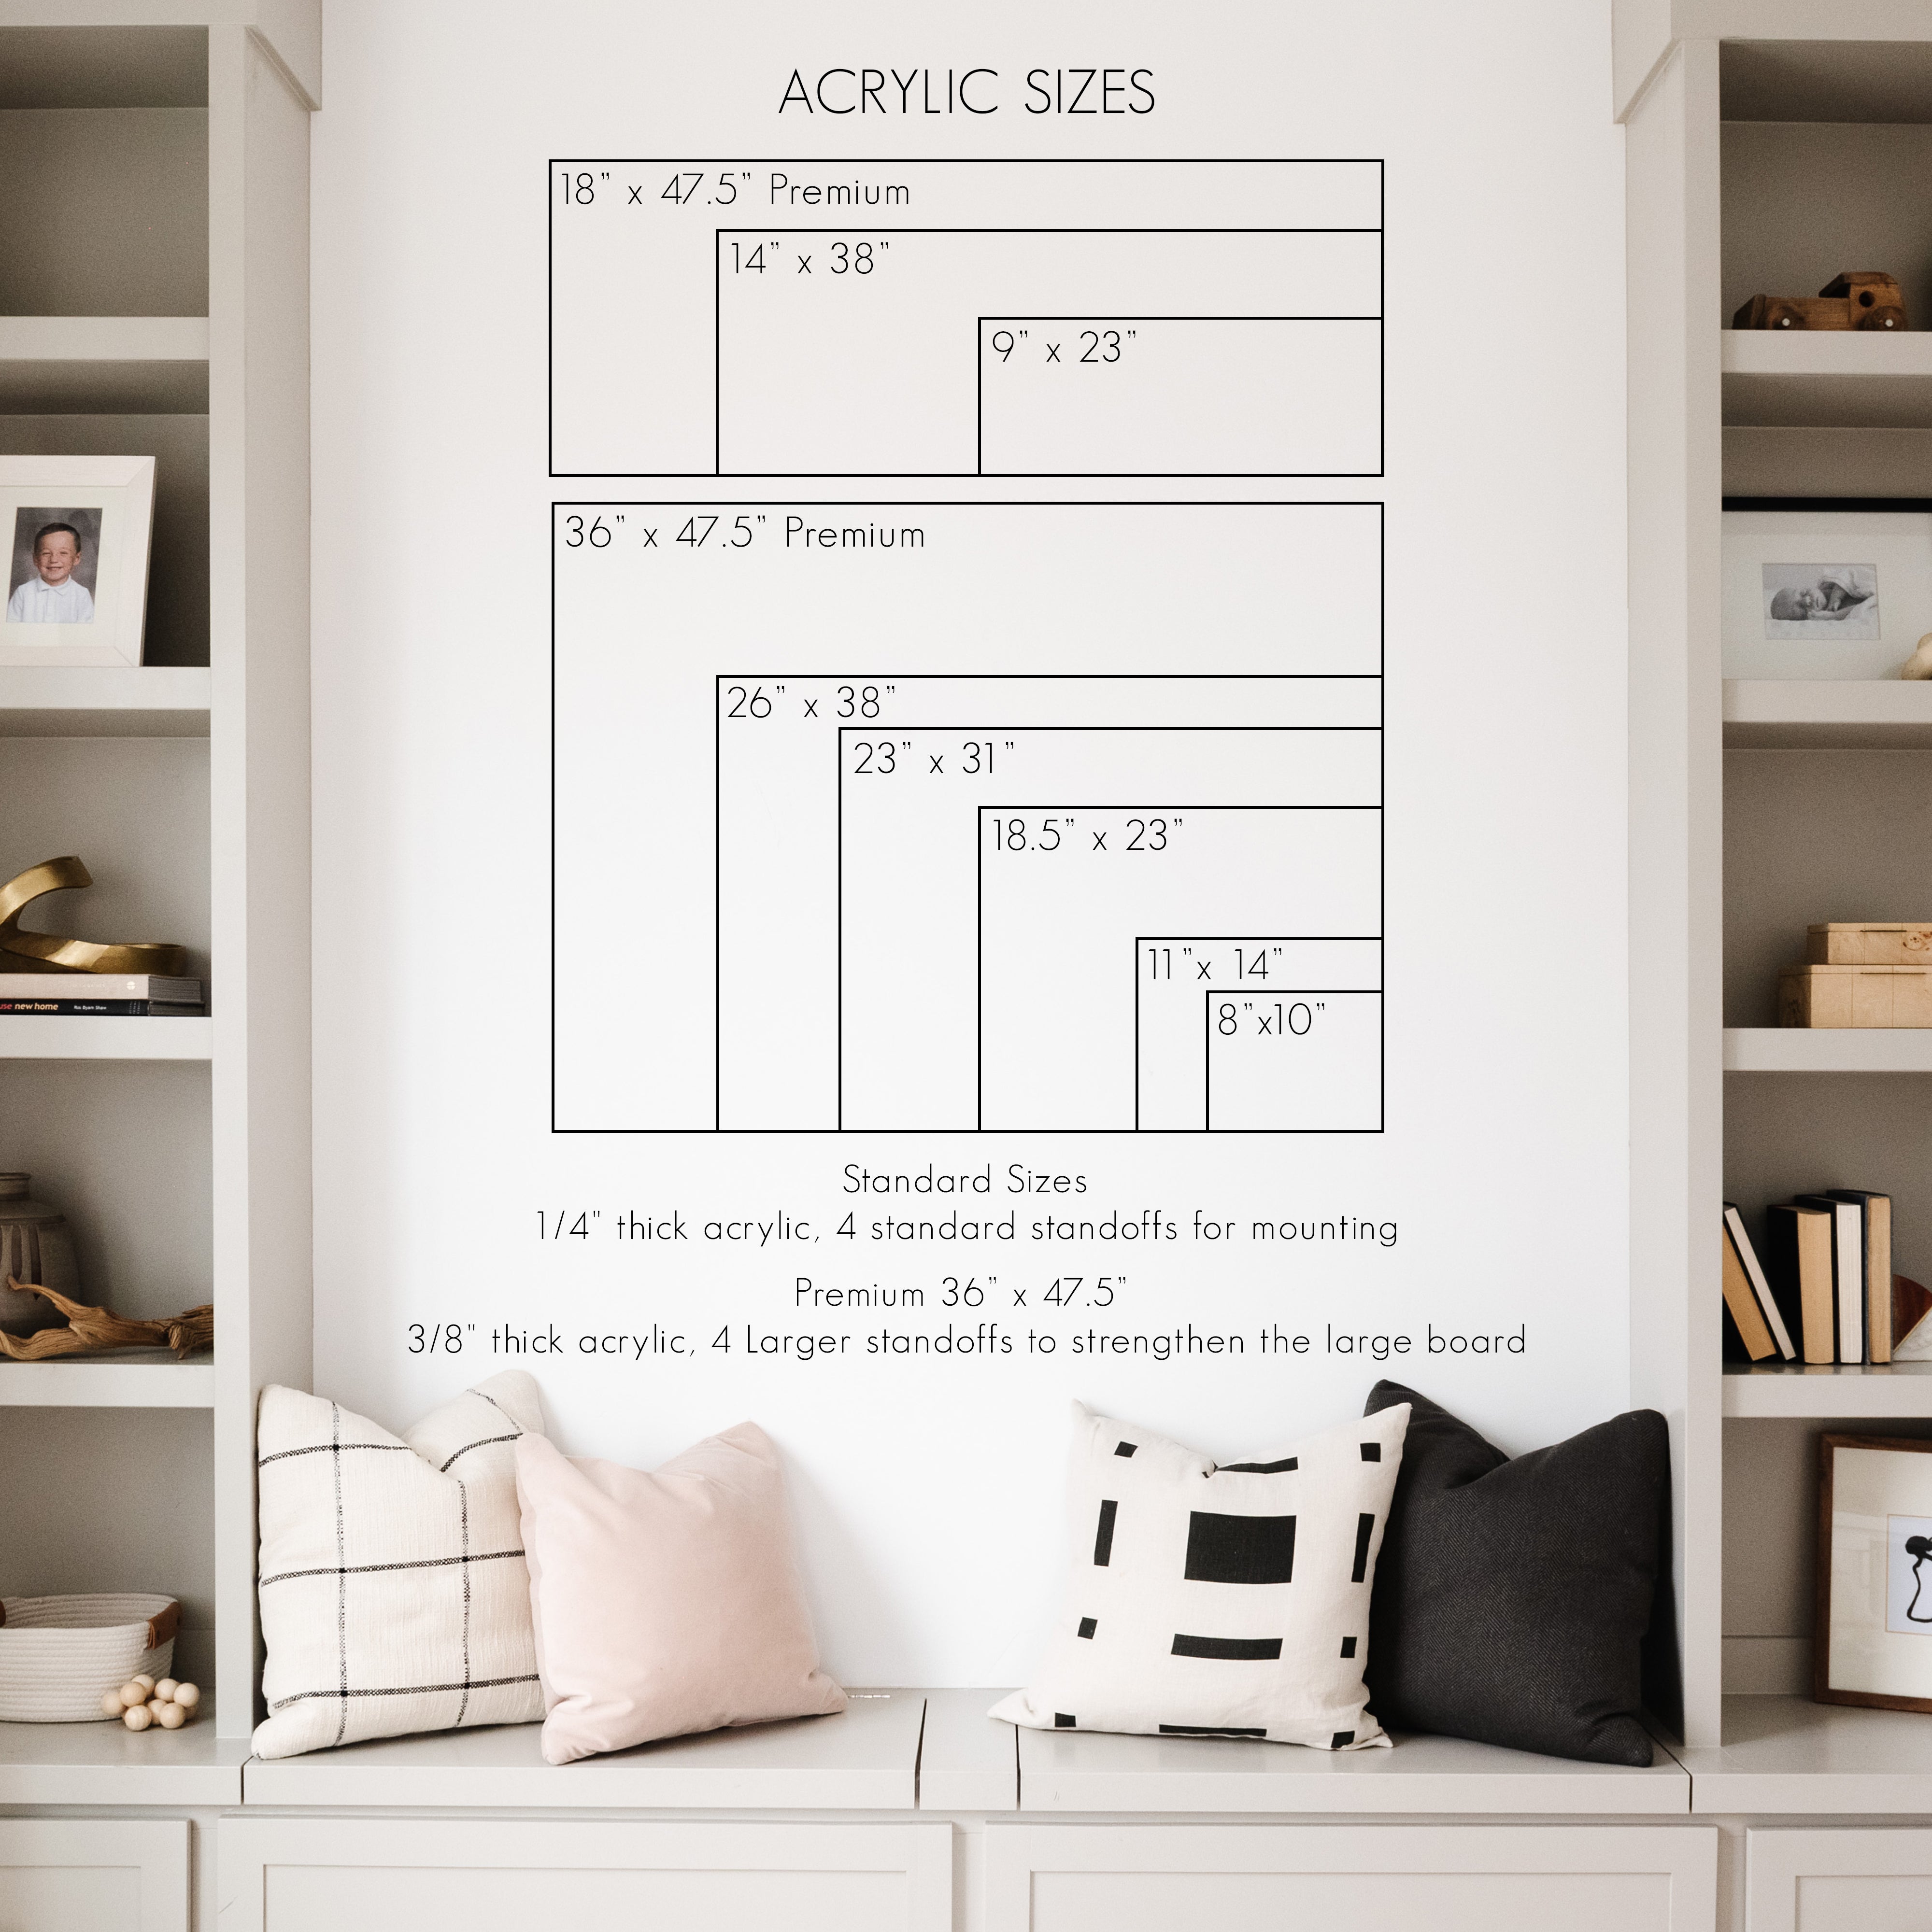 Monthly Frosted Acrylic Calendar + 3 Sections | Horizontal Pennington